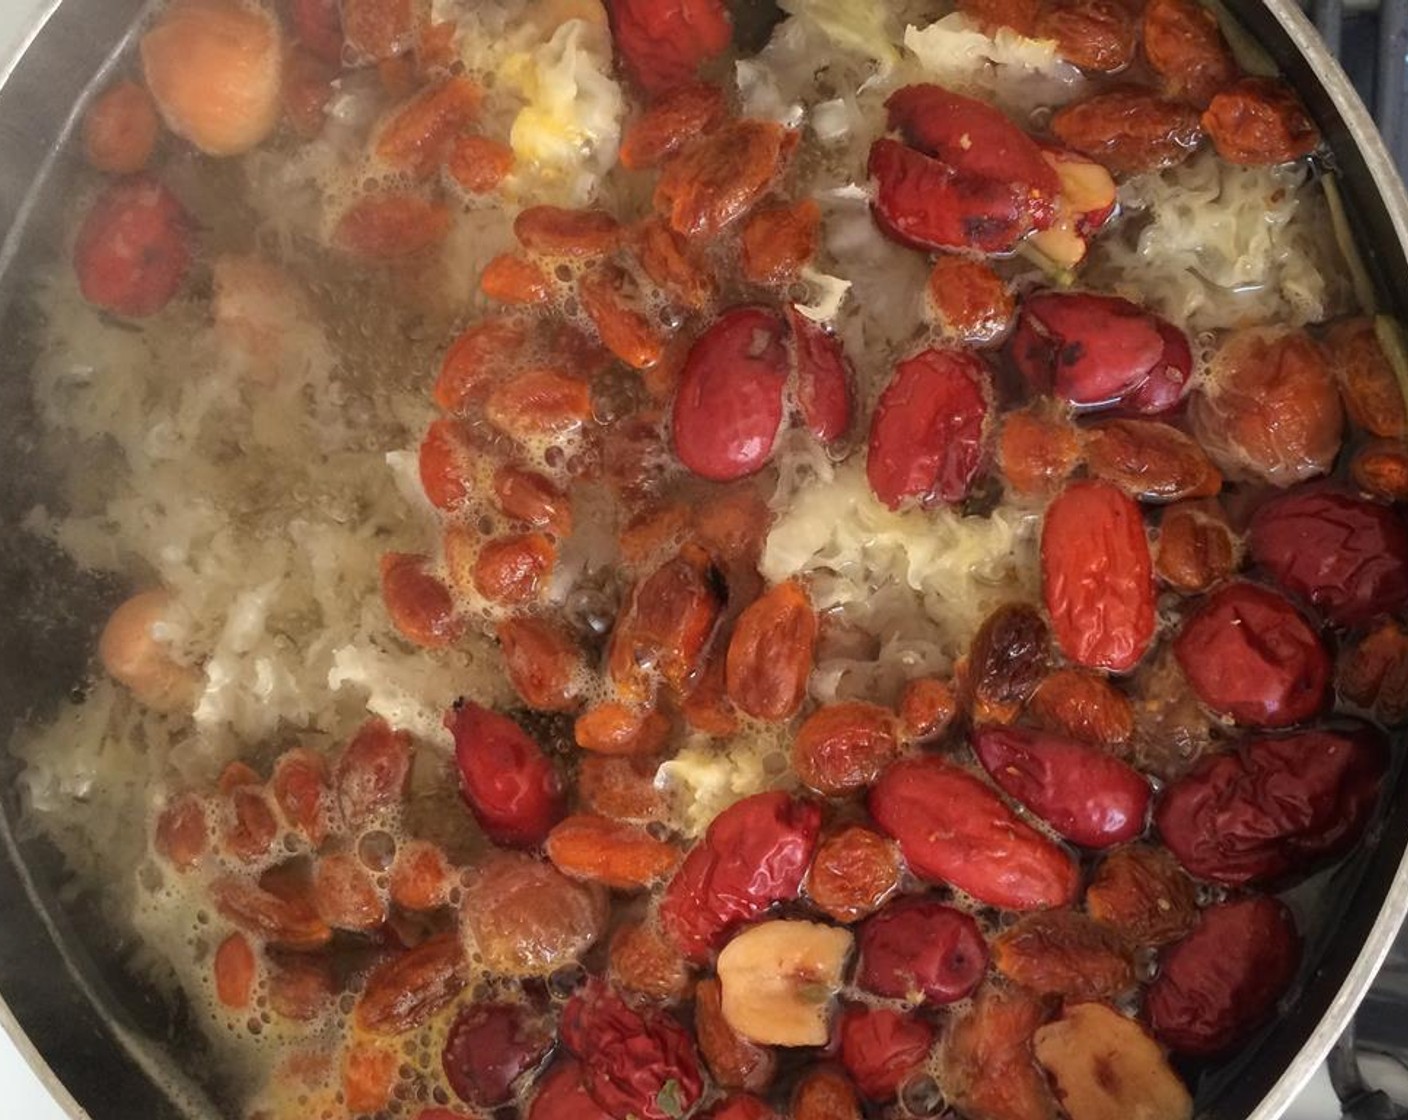 step 5 In a large pot, add Water (8 cups), the chopped mushrooms, dried longan, red dates, and goji berries.